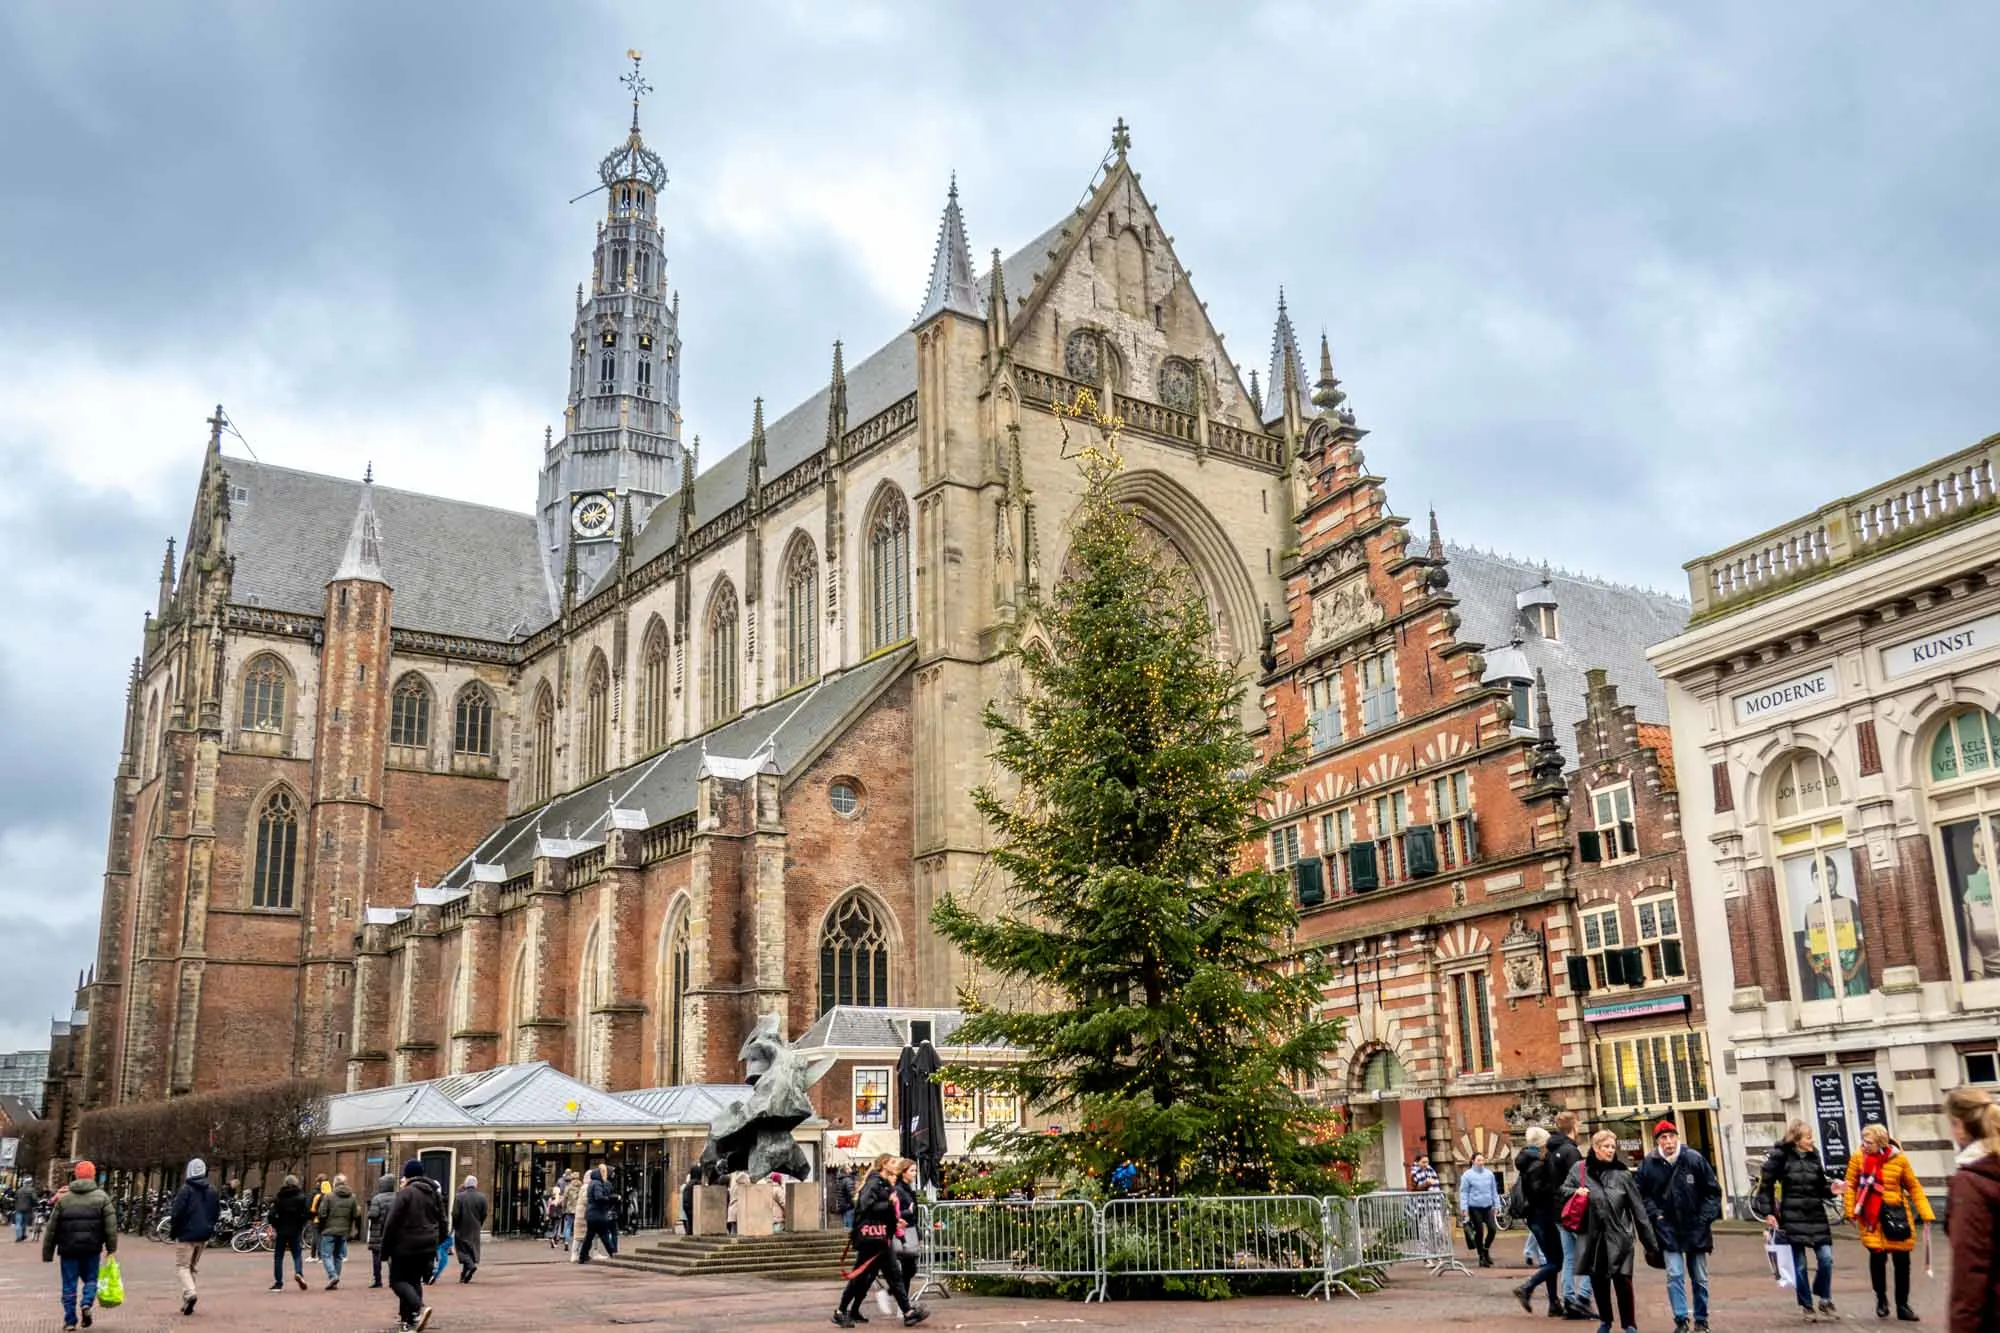 Christmas tree in front of a large medieval church in a city square